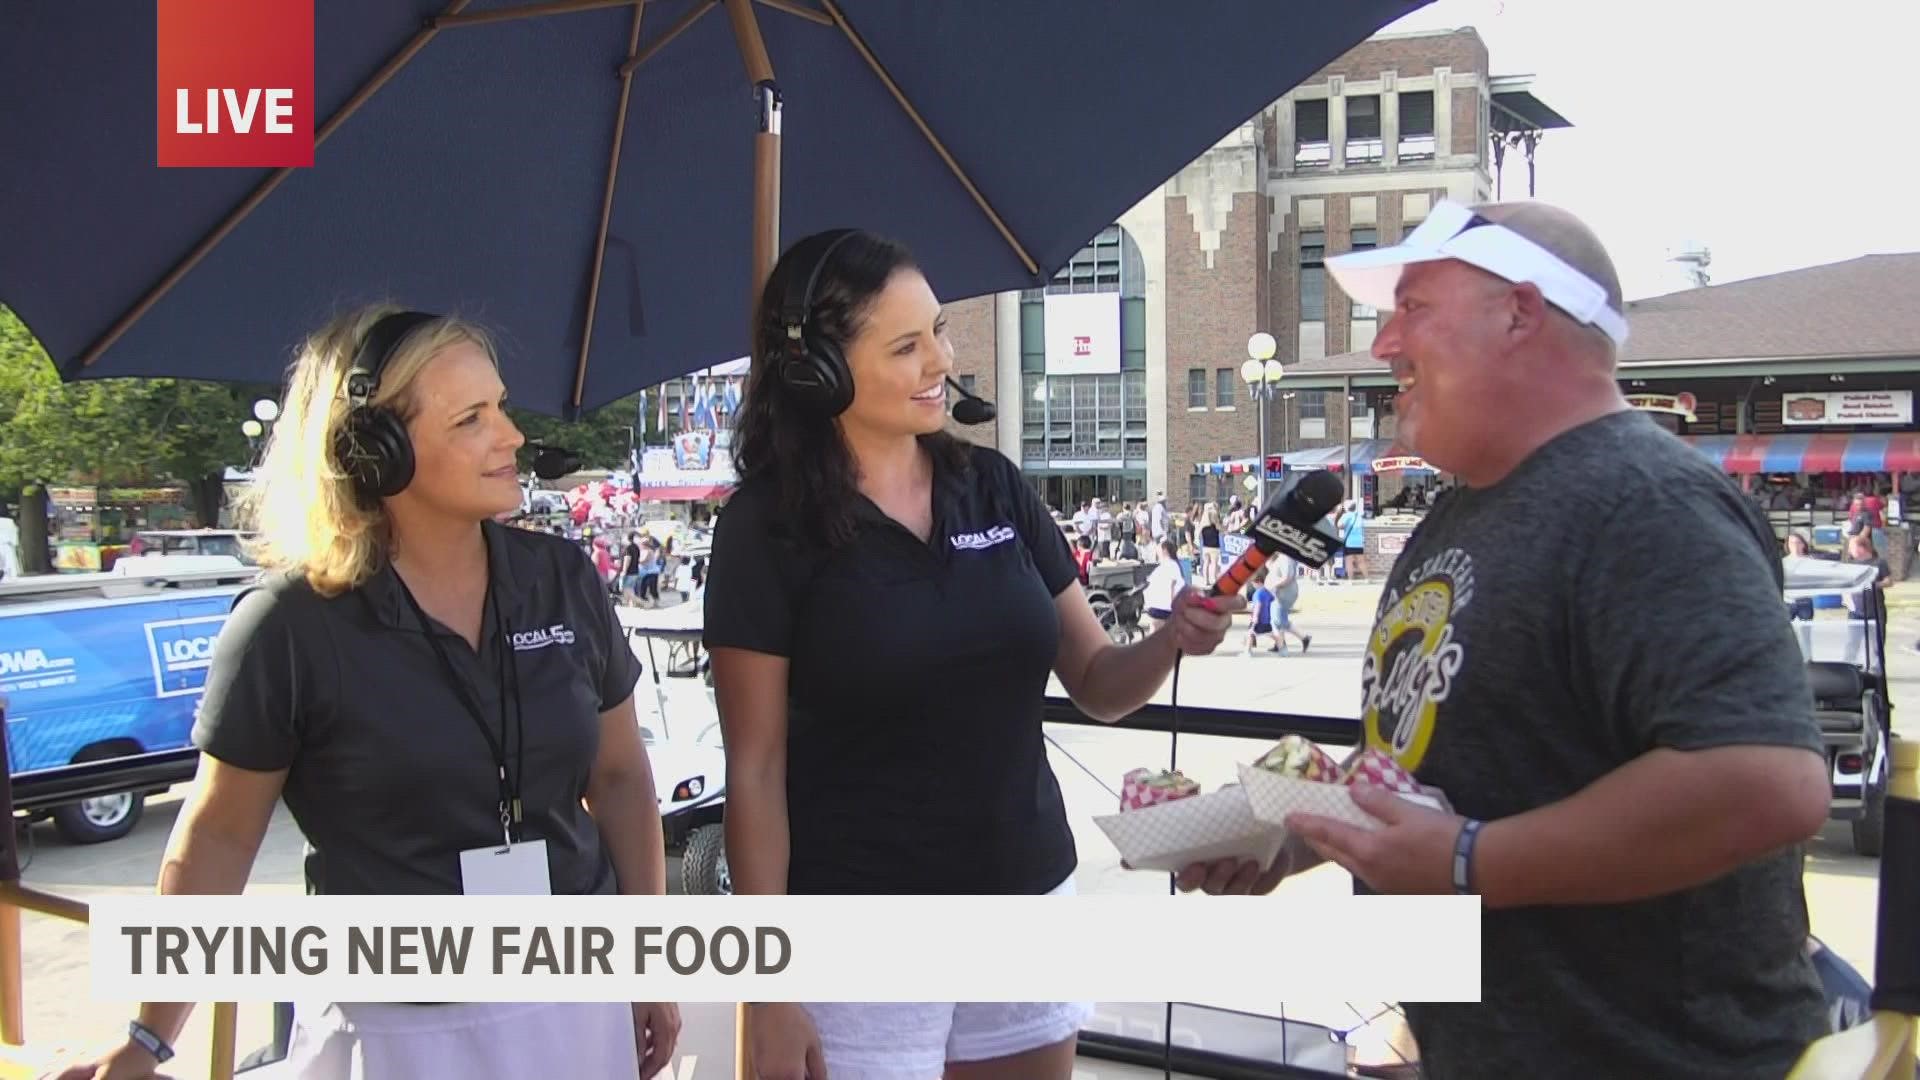 Wraps are what G Mig's does best at the Iowa State Fair. Learn what's on "The Giorgio."